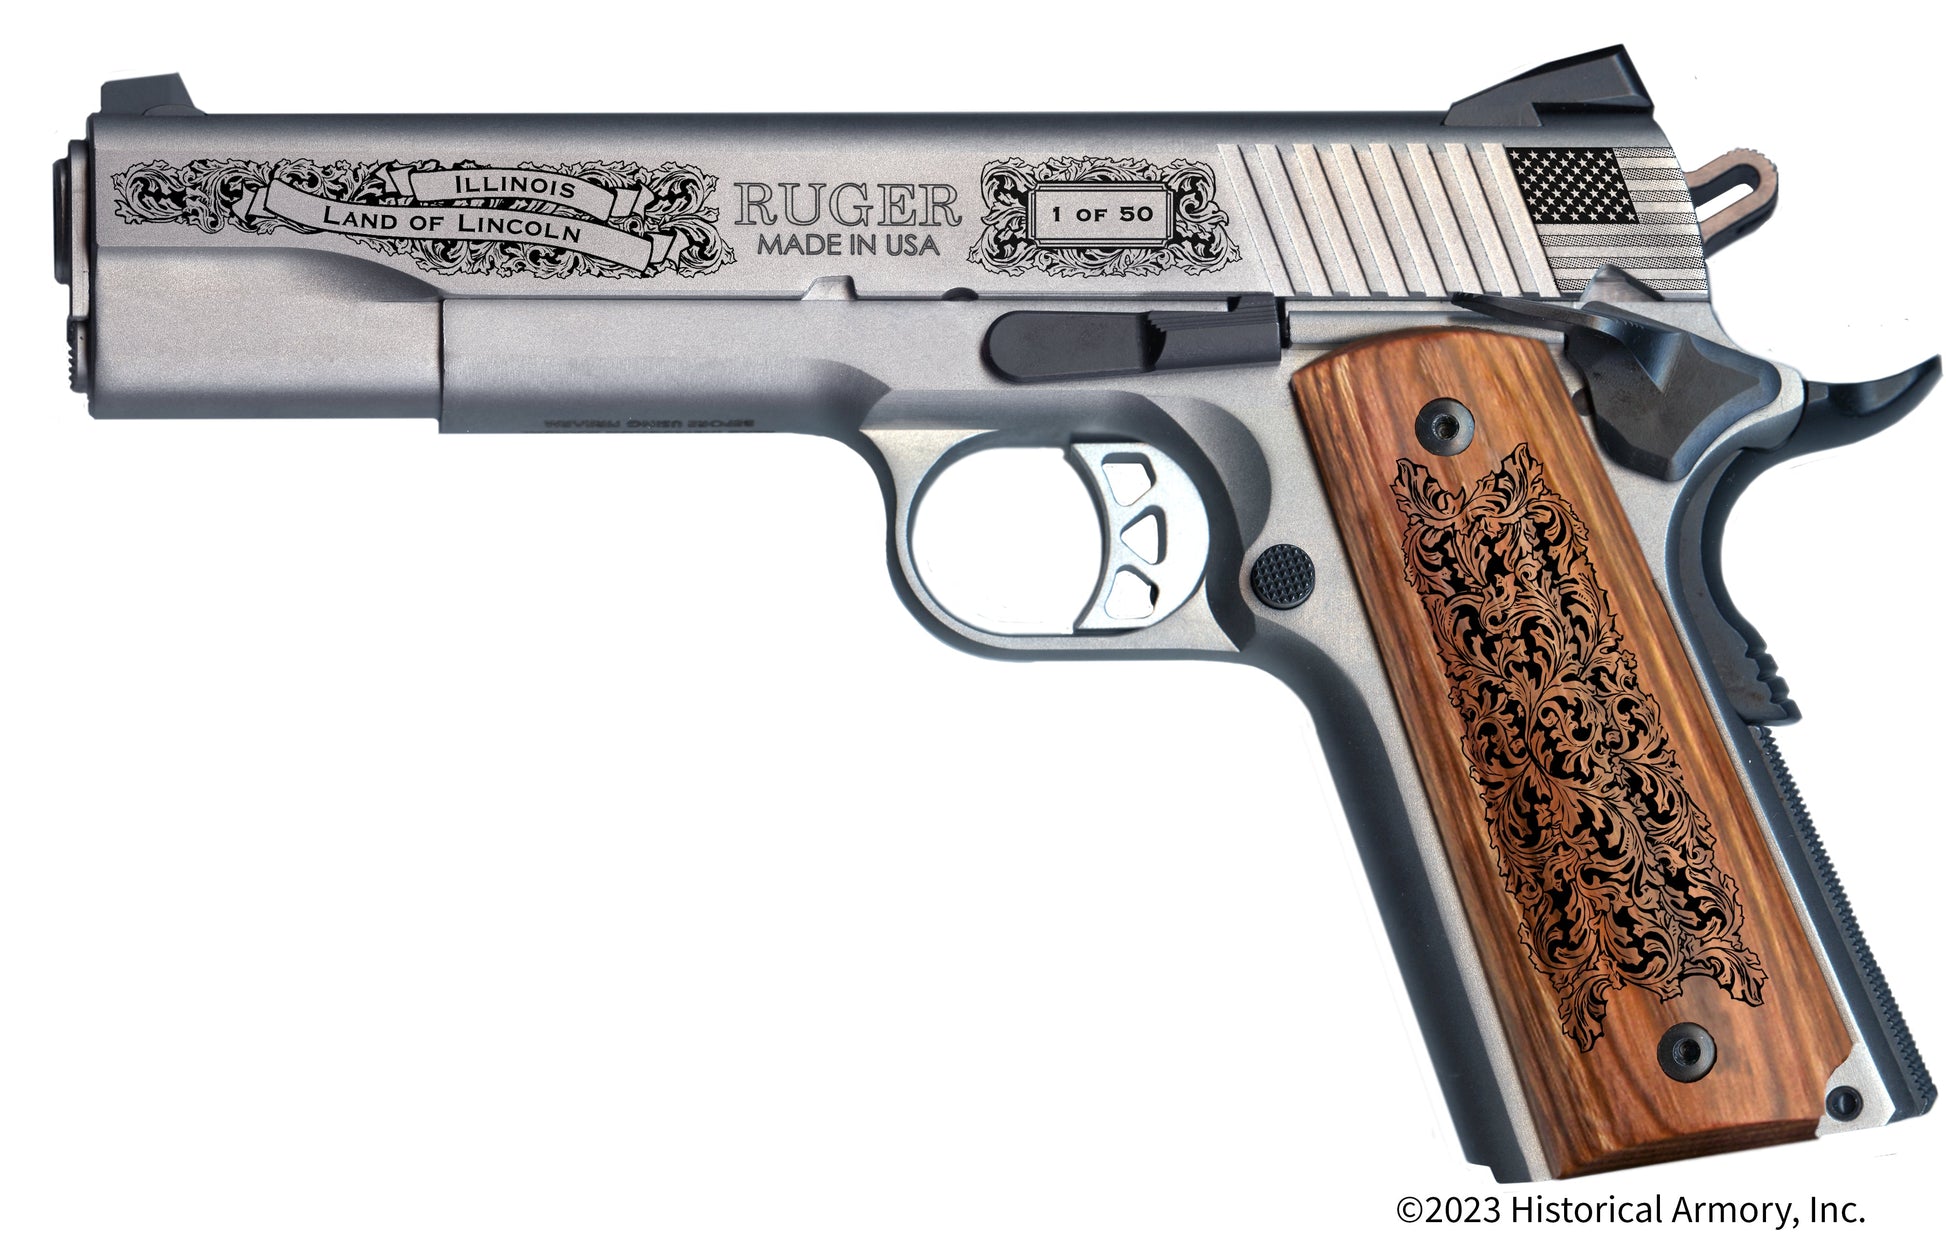 Jo Daviess  County Illinois Engraved .45 Auto Ruger 1911